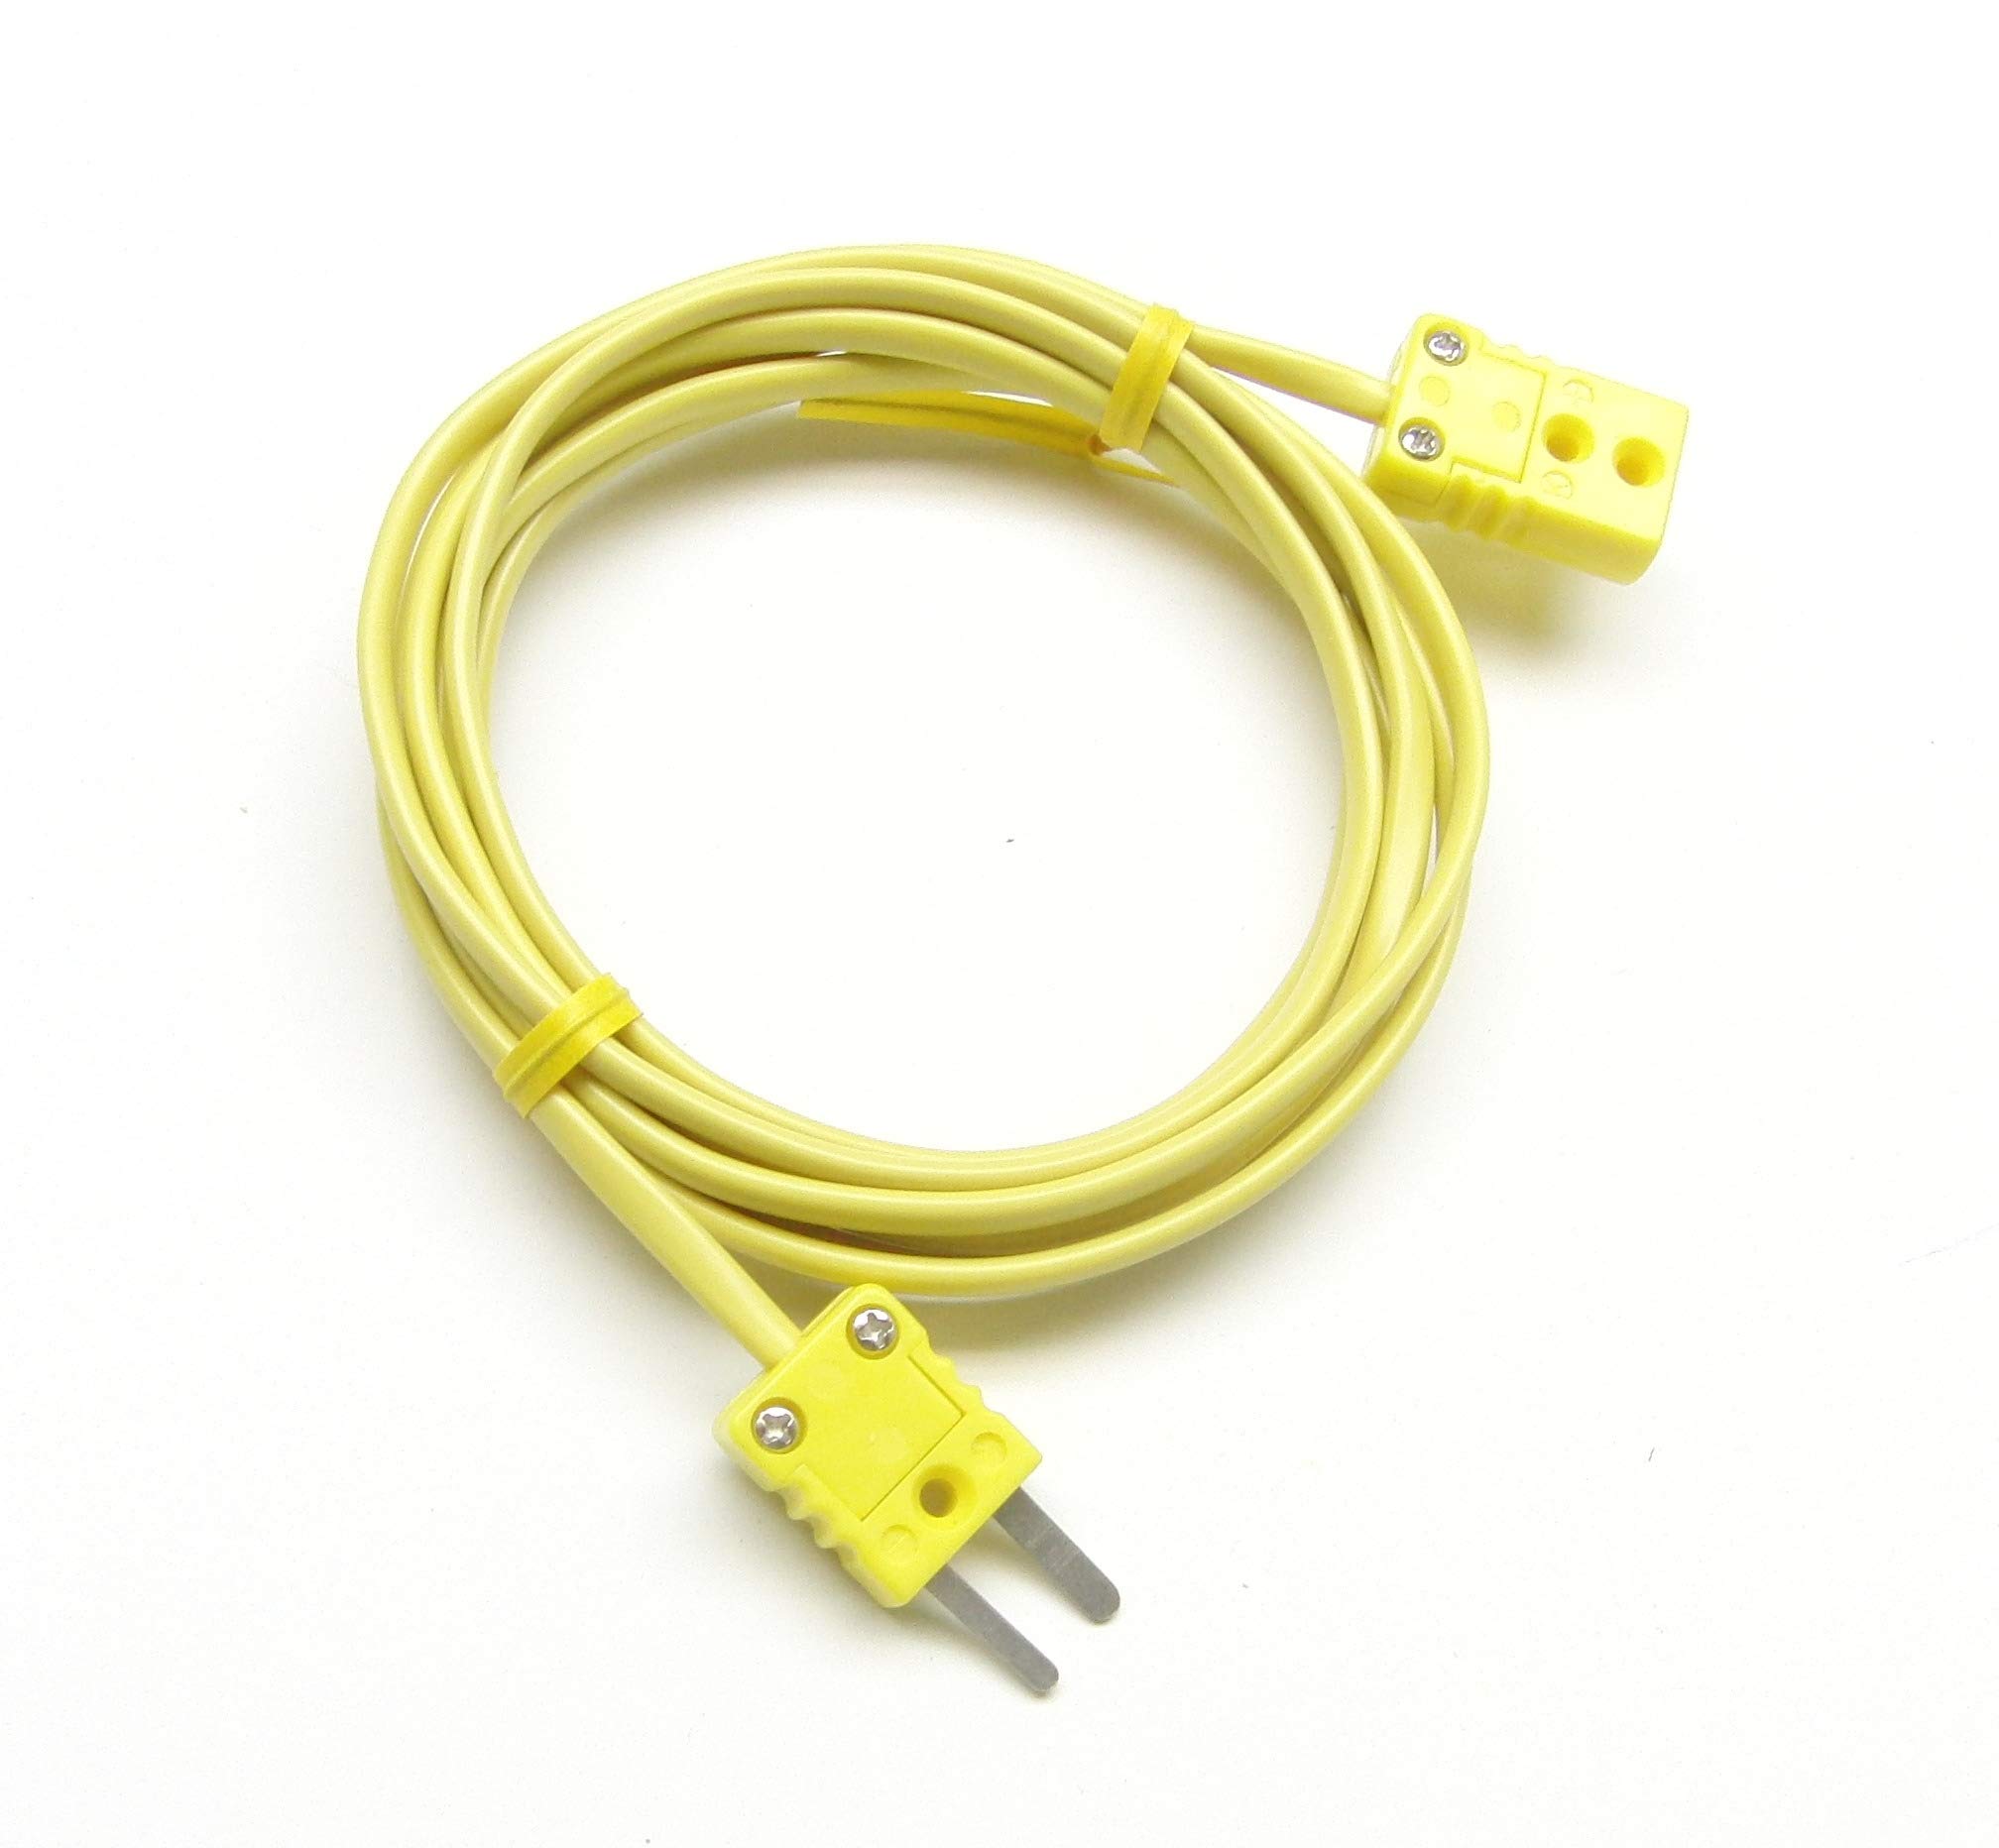 K-Type Thermocouple Extension Cable Wire with Miniature Mini Thermocouple Connectors 15 ft (= 5 Yard) Long